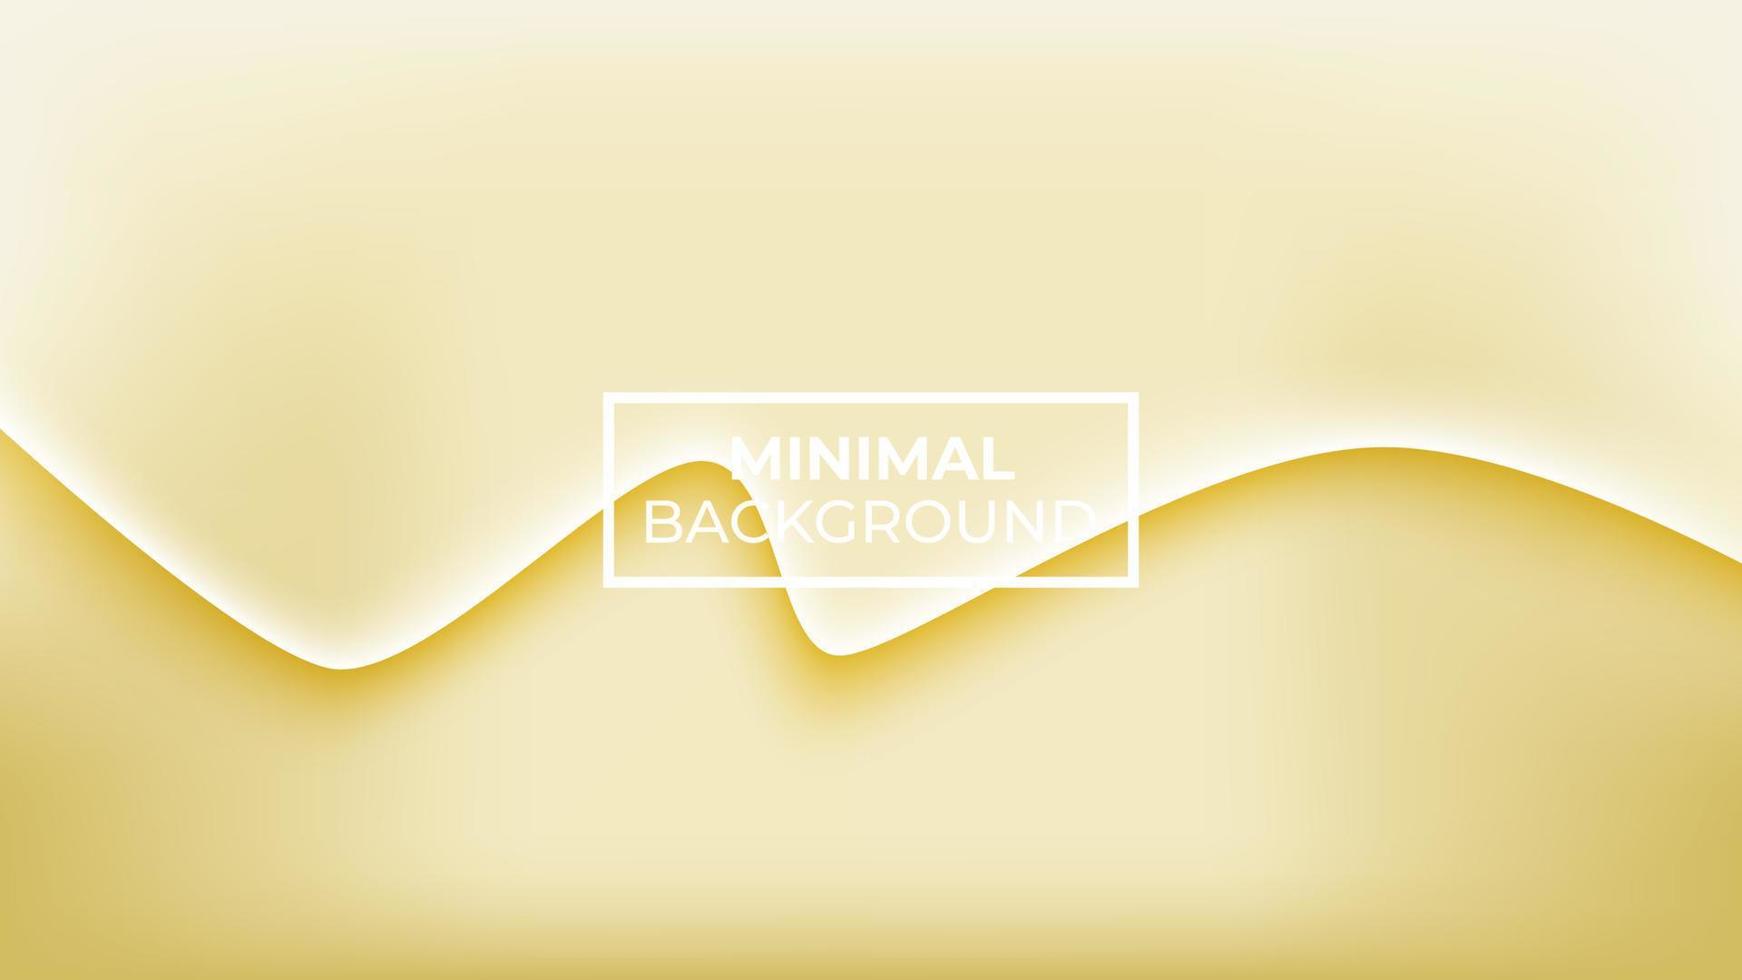 Minimal background yellow color and one line dividing in the middle, easy to edit vector